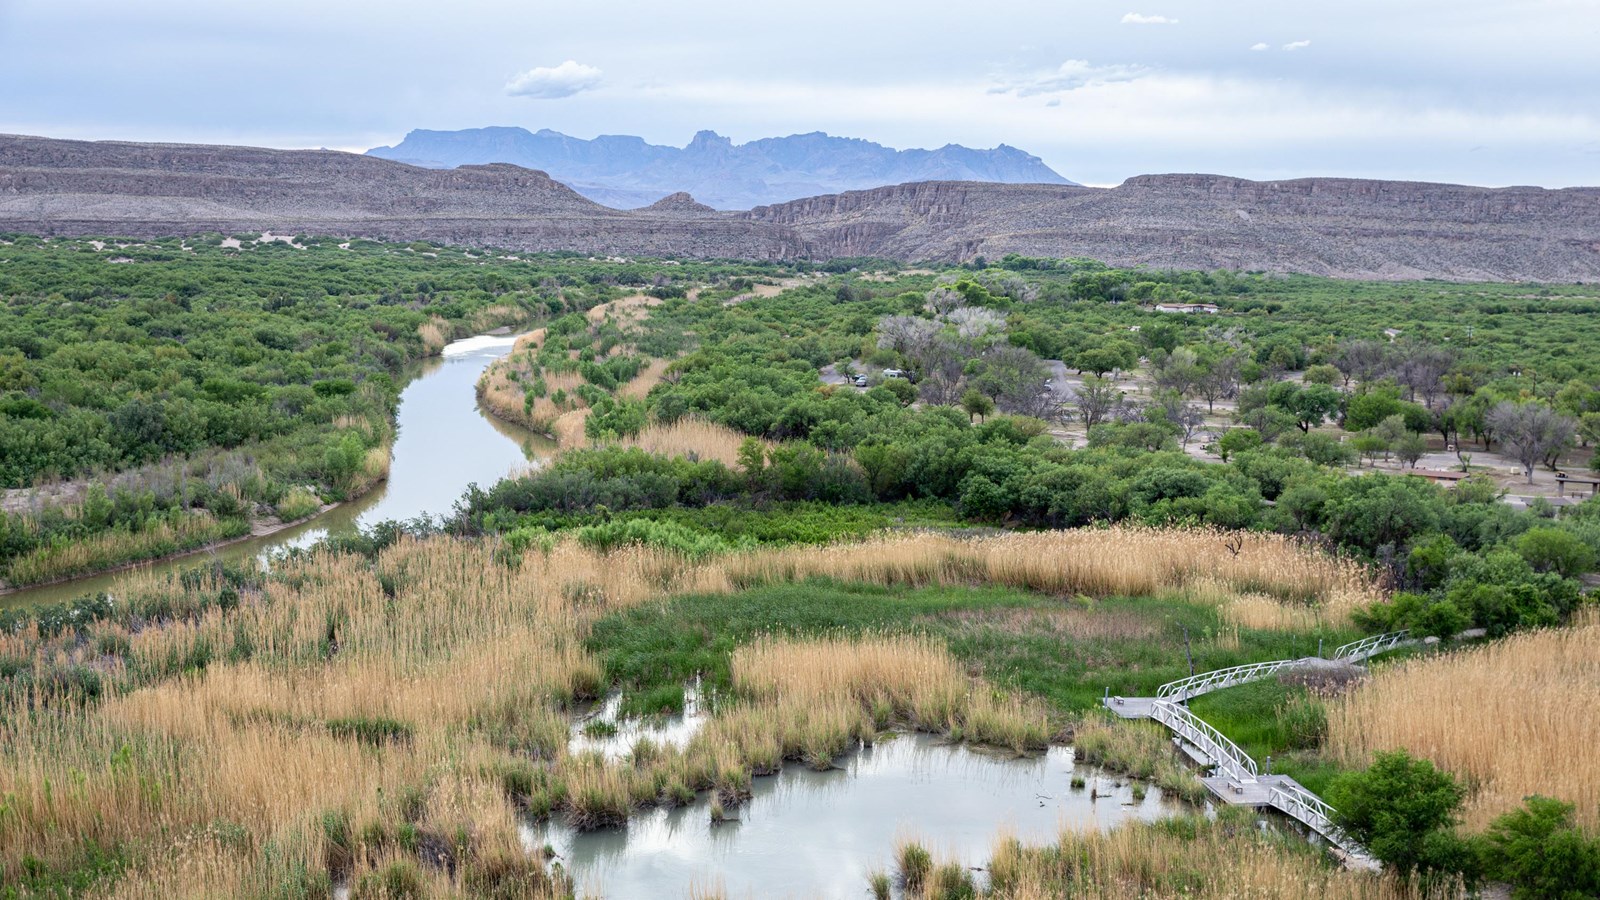 A view looking out over a wetland pond, the Rio Grande, and the Chisos Mountains in the distance.